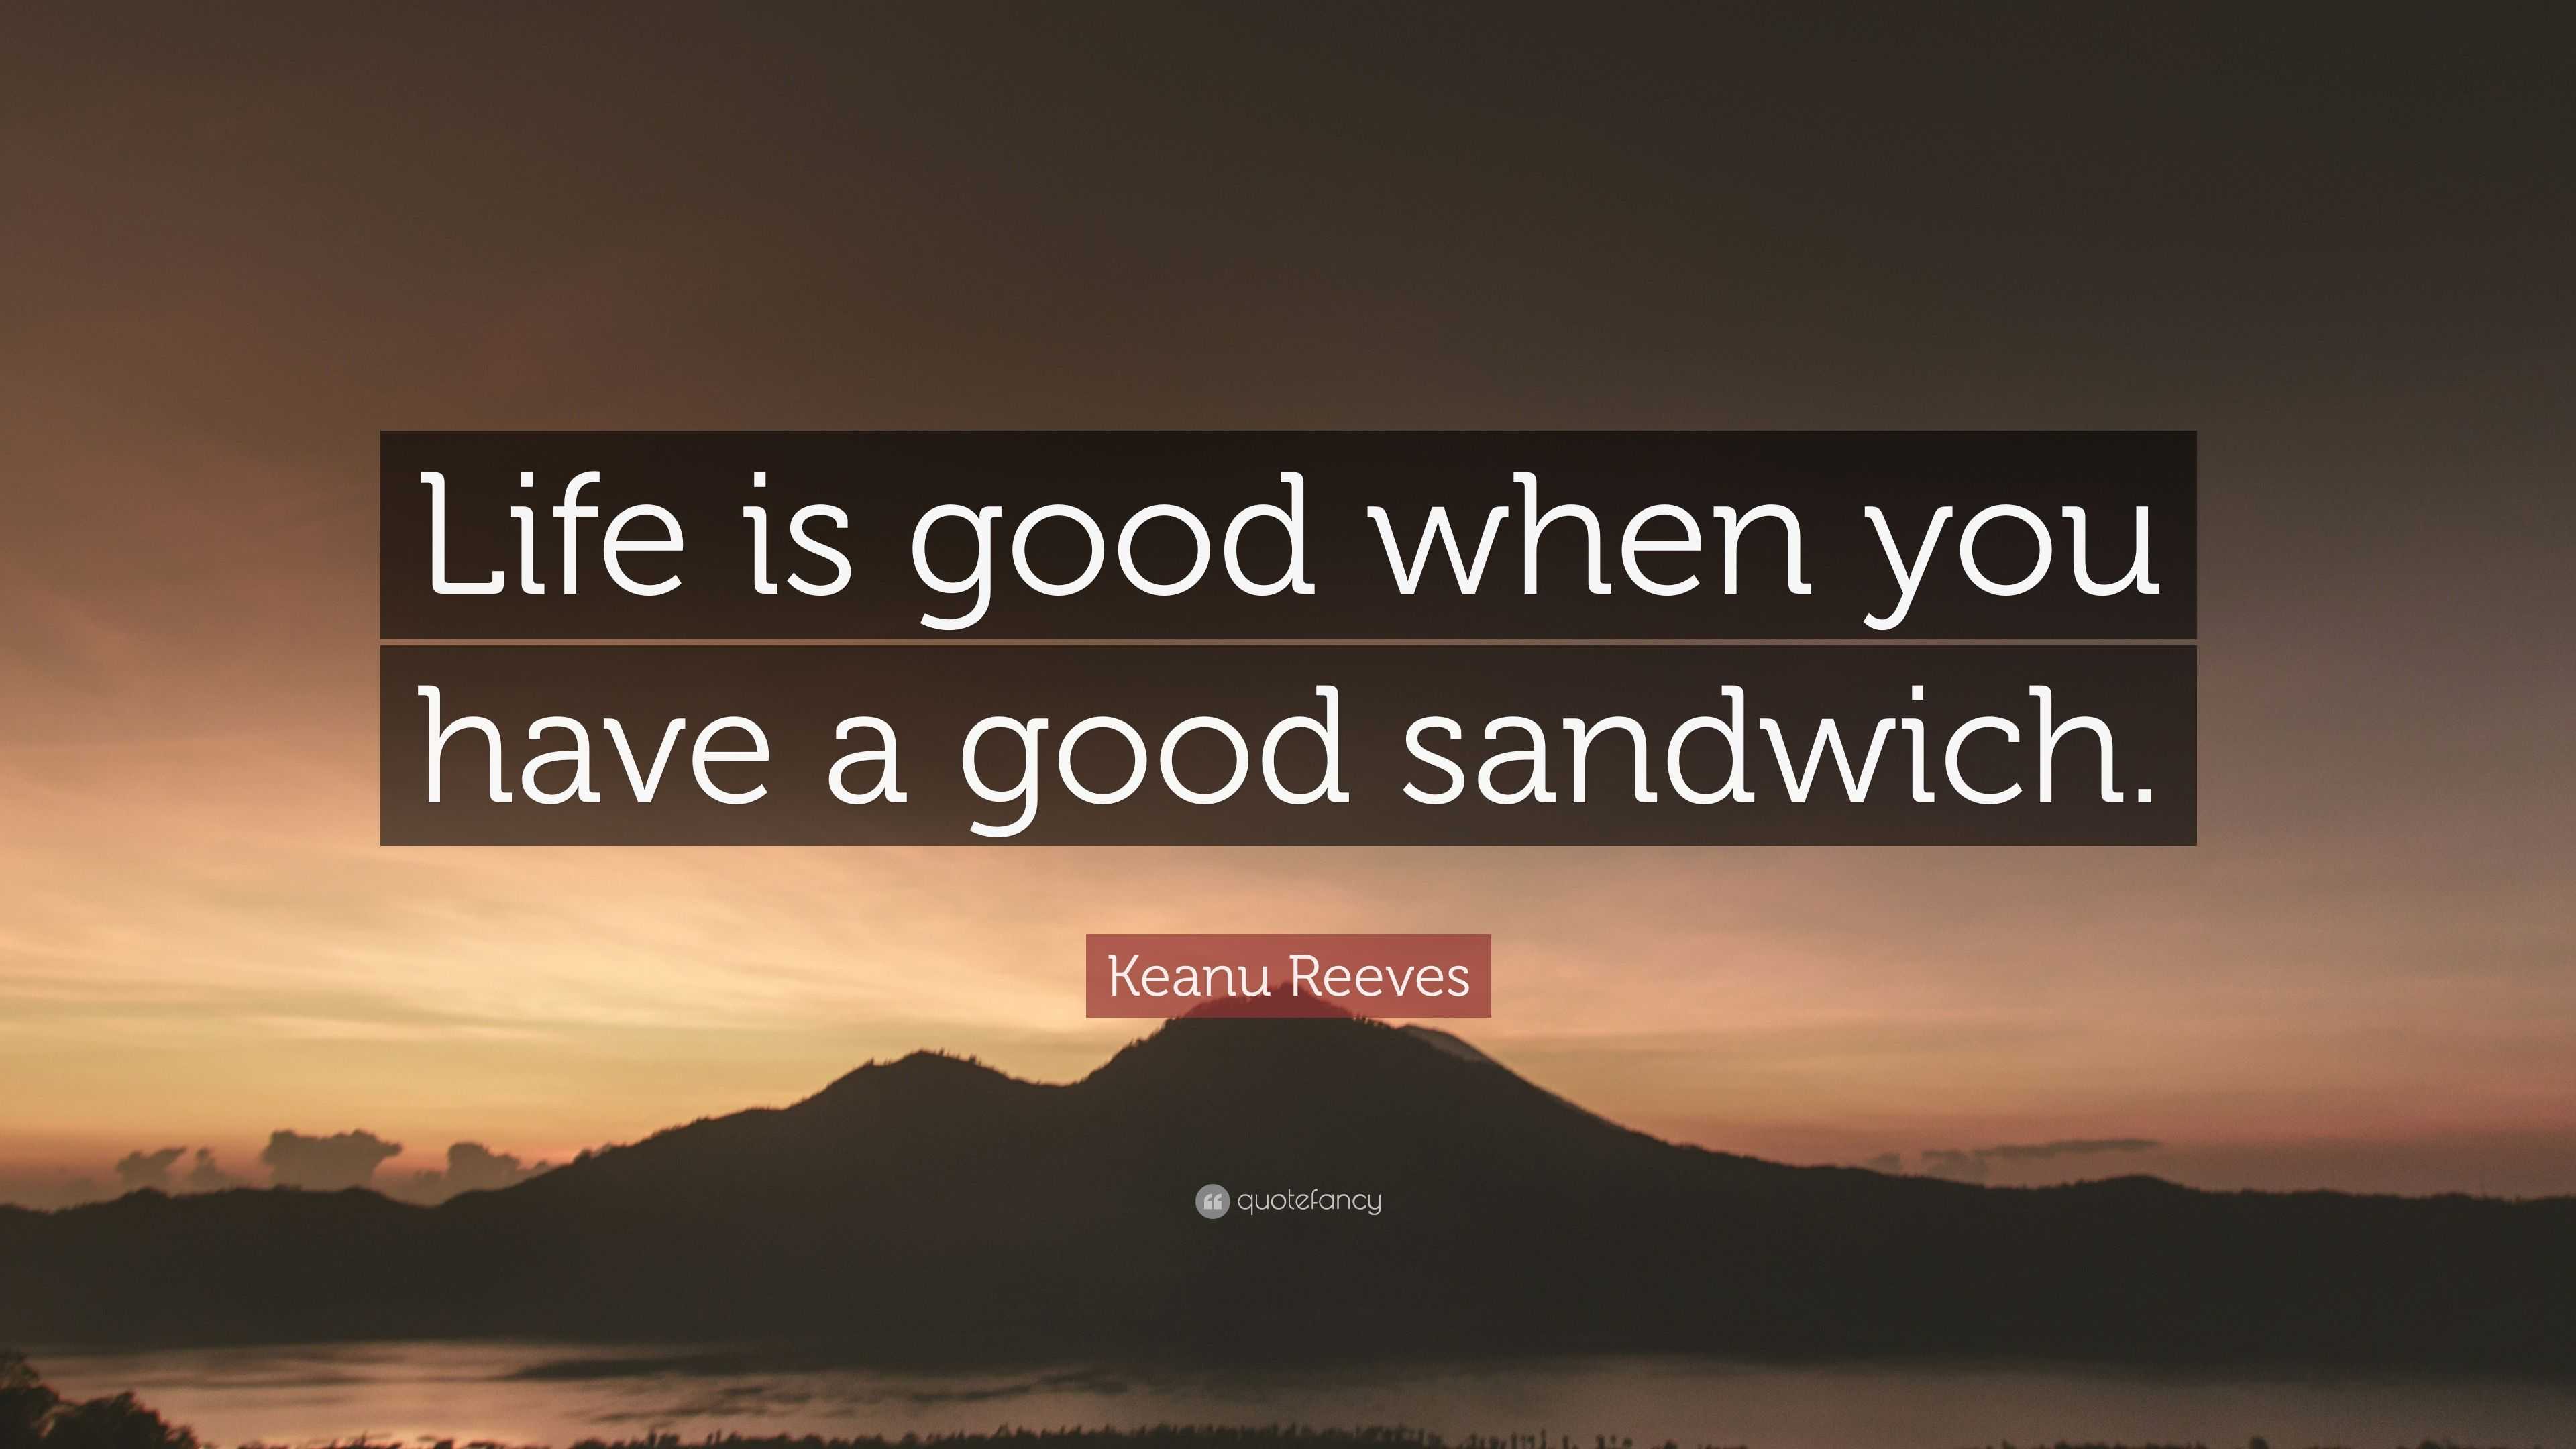 Keanu Reeves Quote “Life is good when you have a good sandwich ”